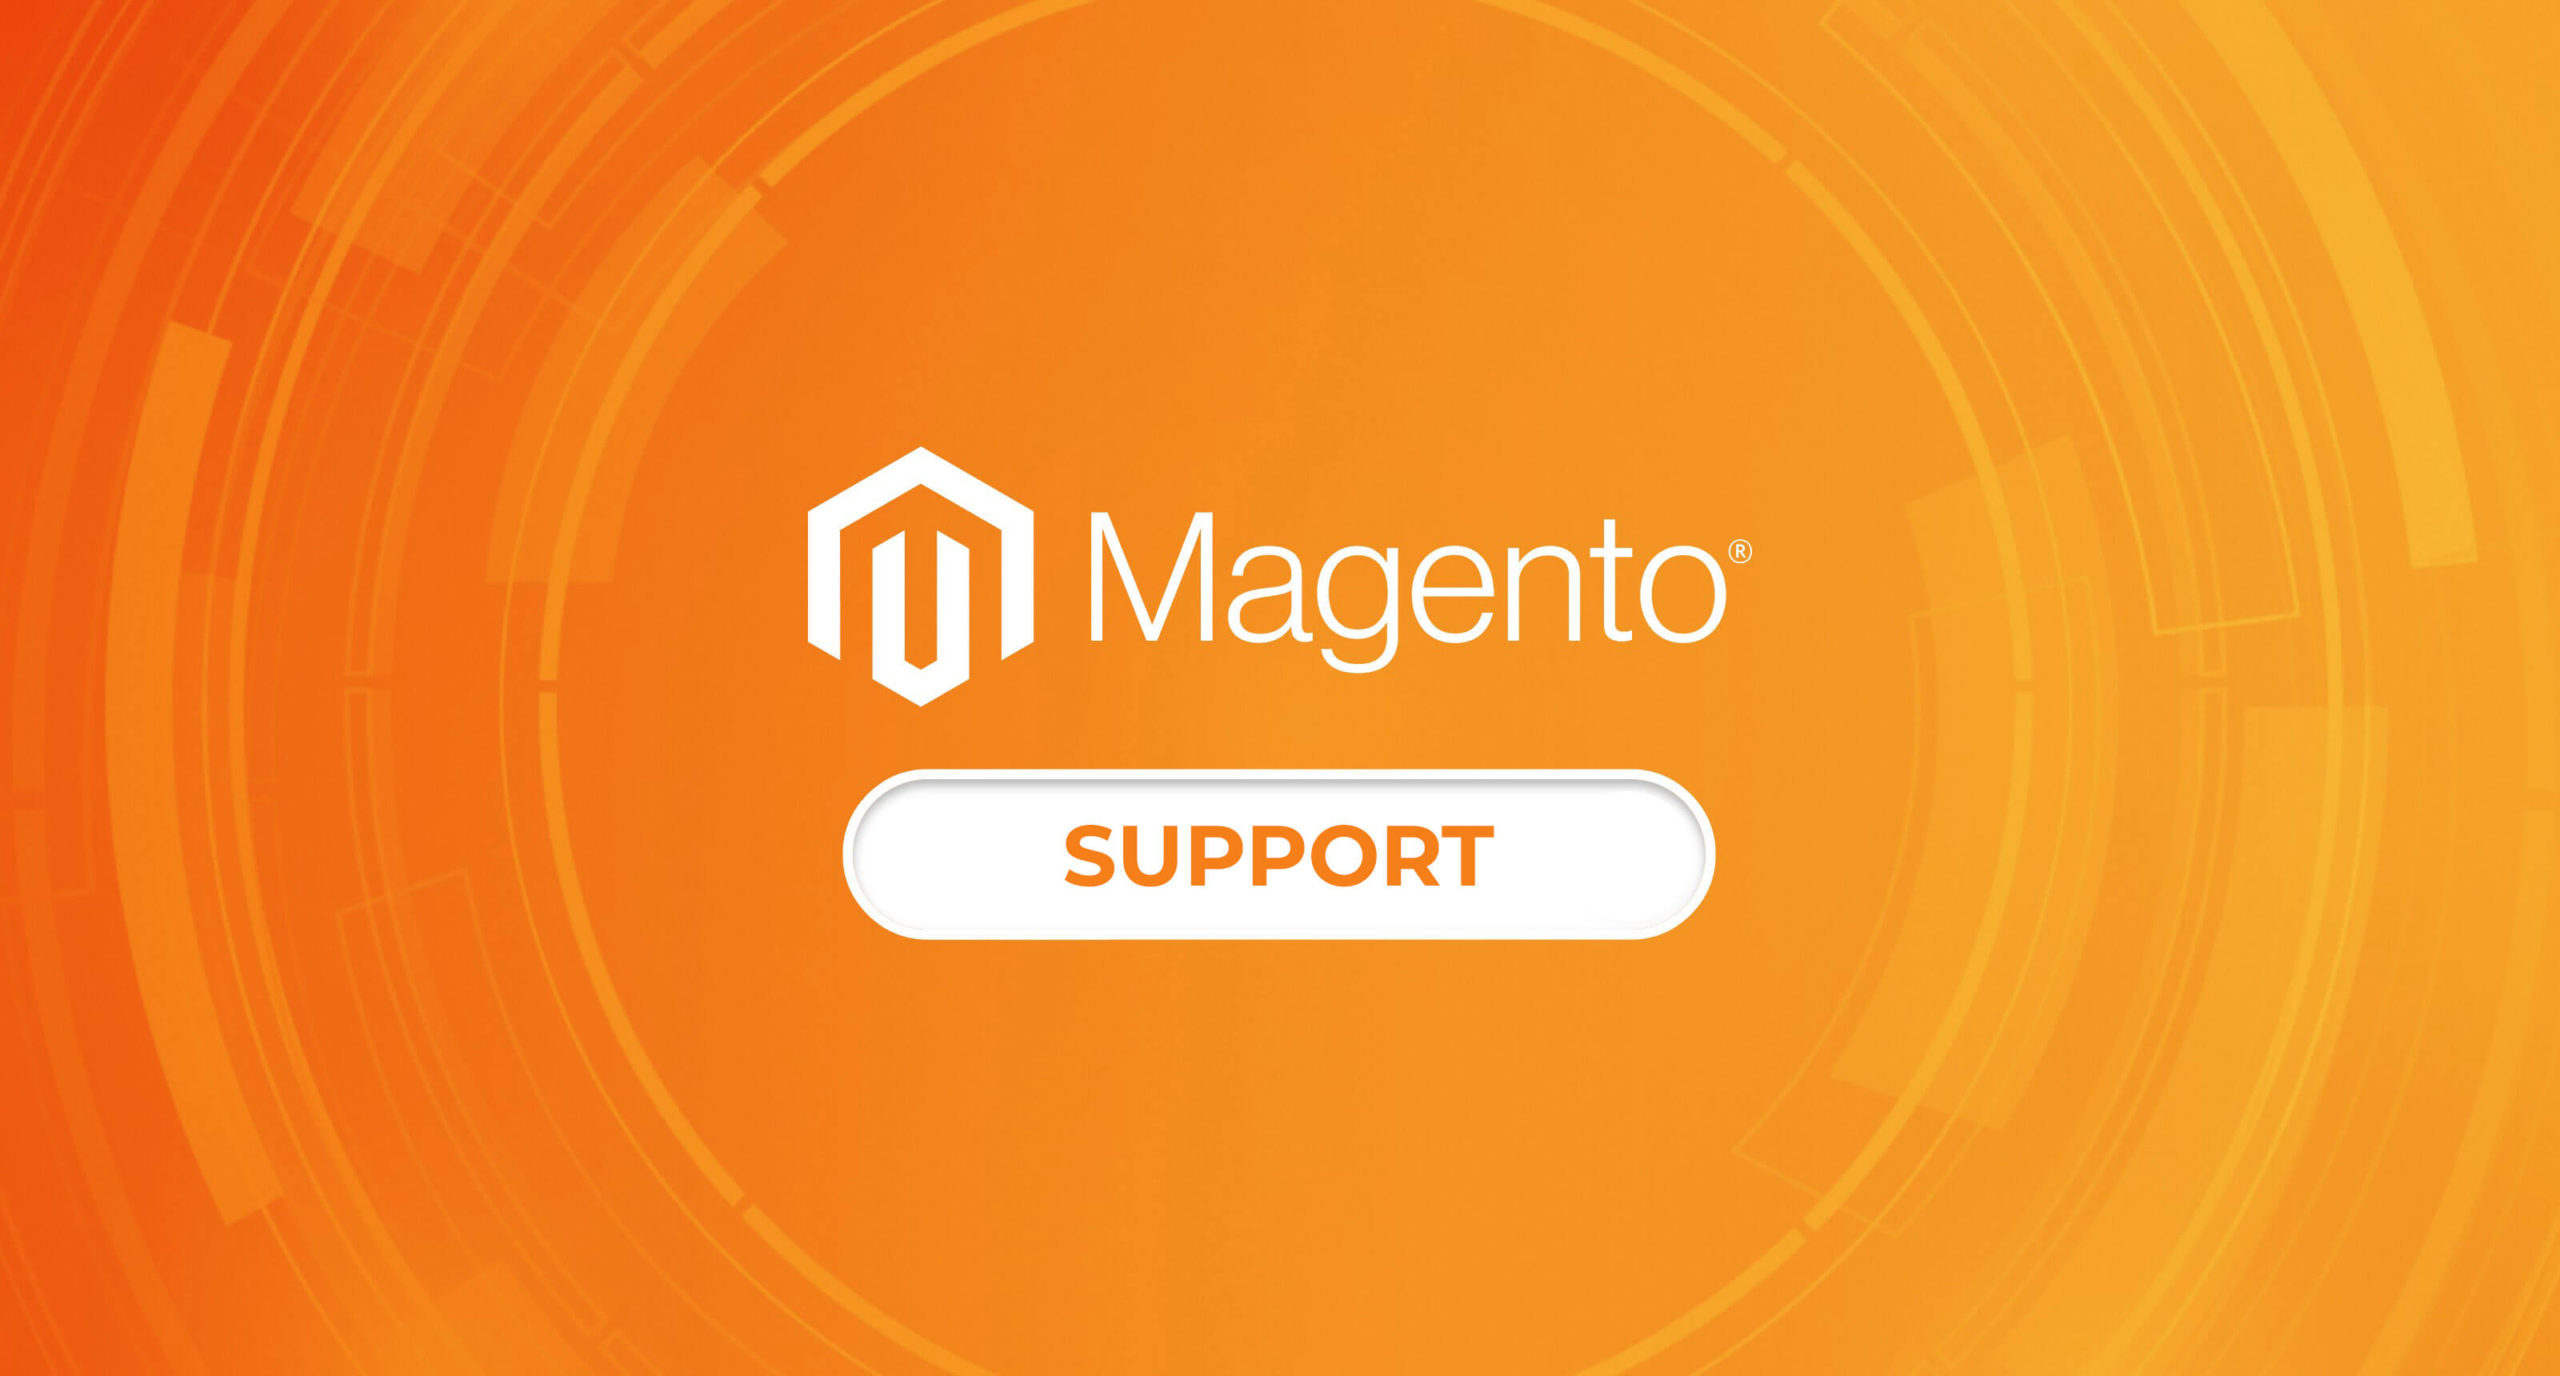 How to Get the Most Out of Magento Support